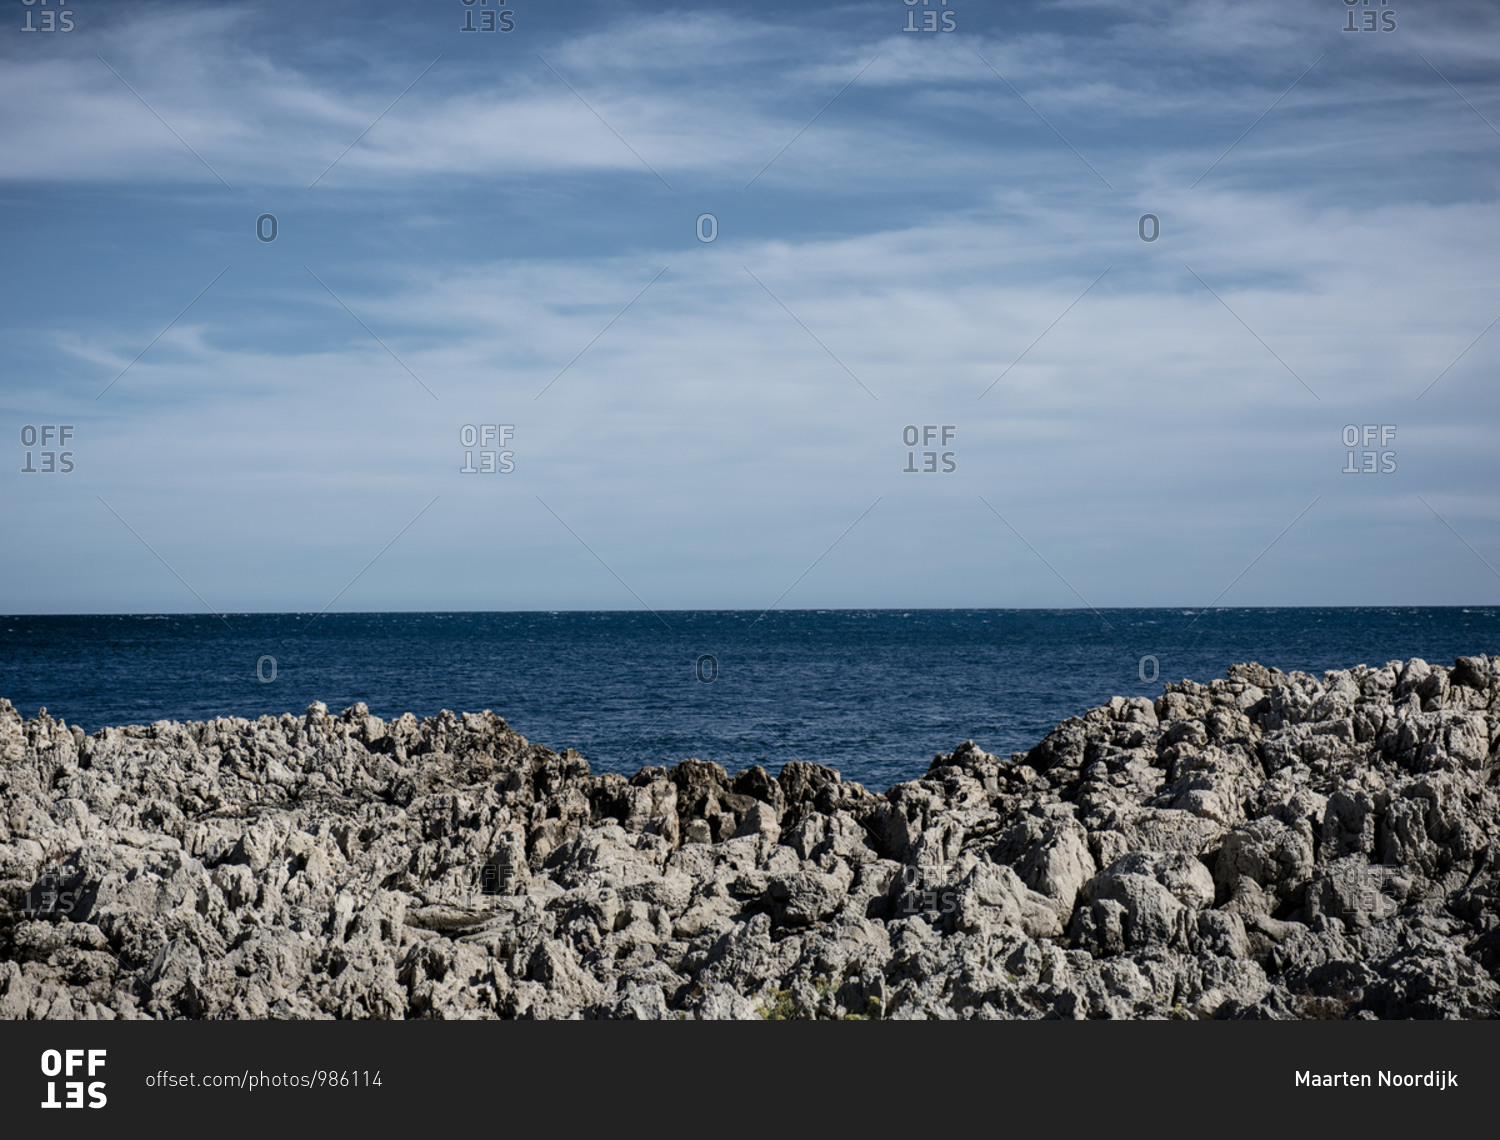 A sailing ship on the horizon of the Mediterranean Sea with a rocky coastline on the d\'Azur near Antibes in France.